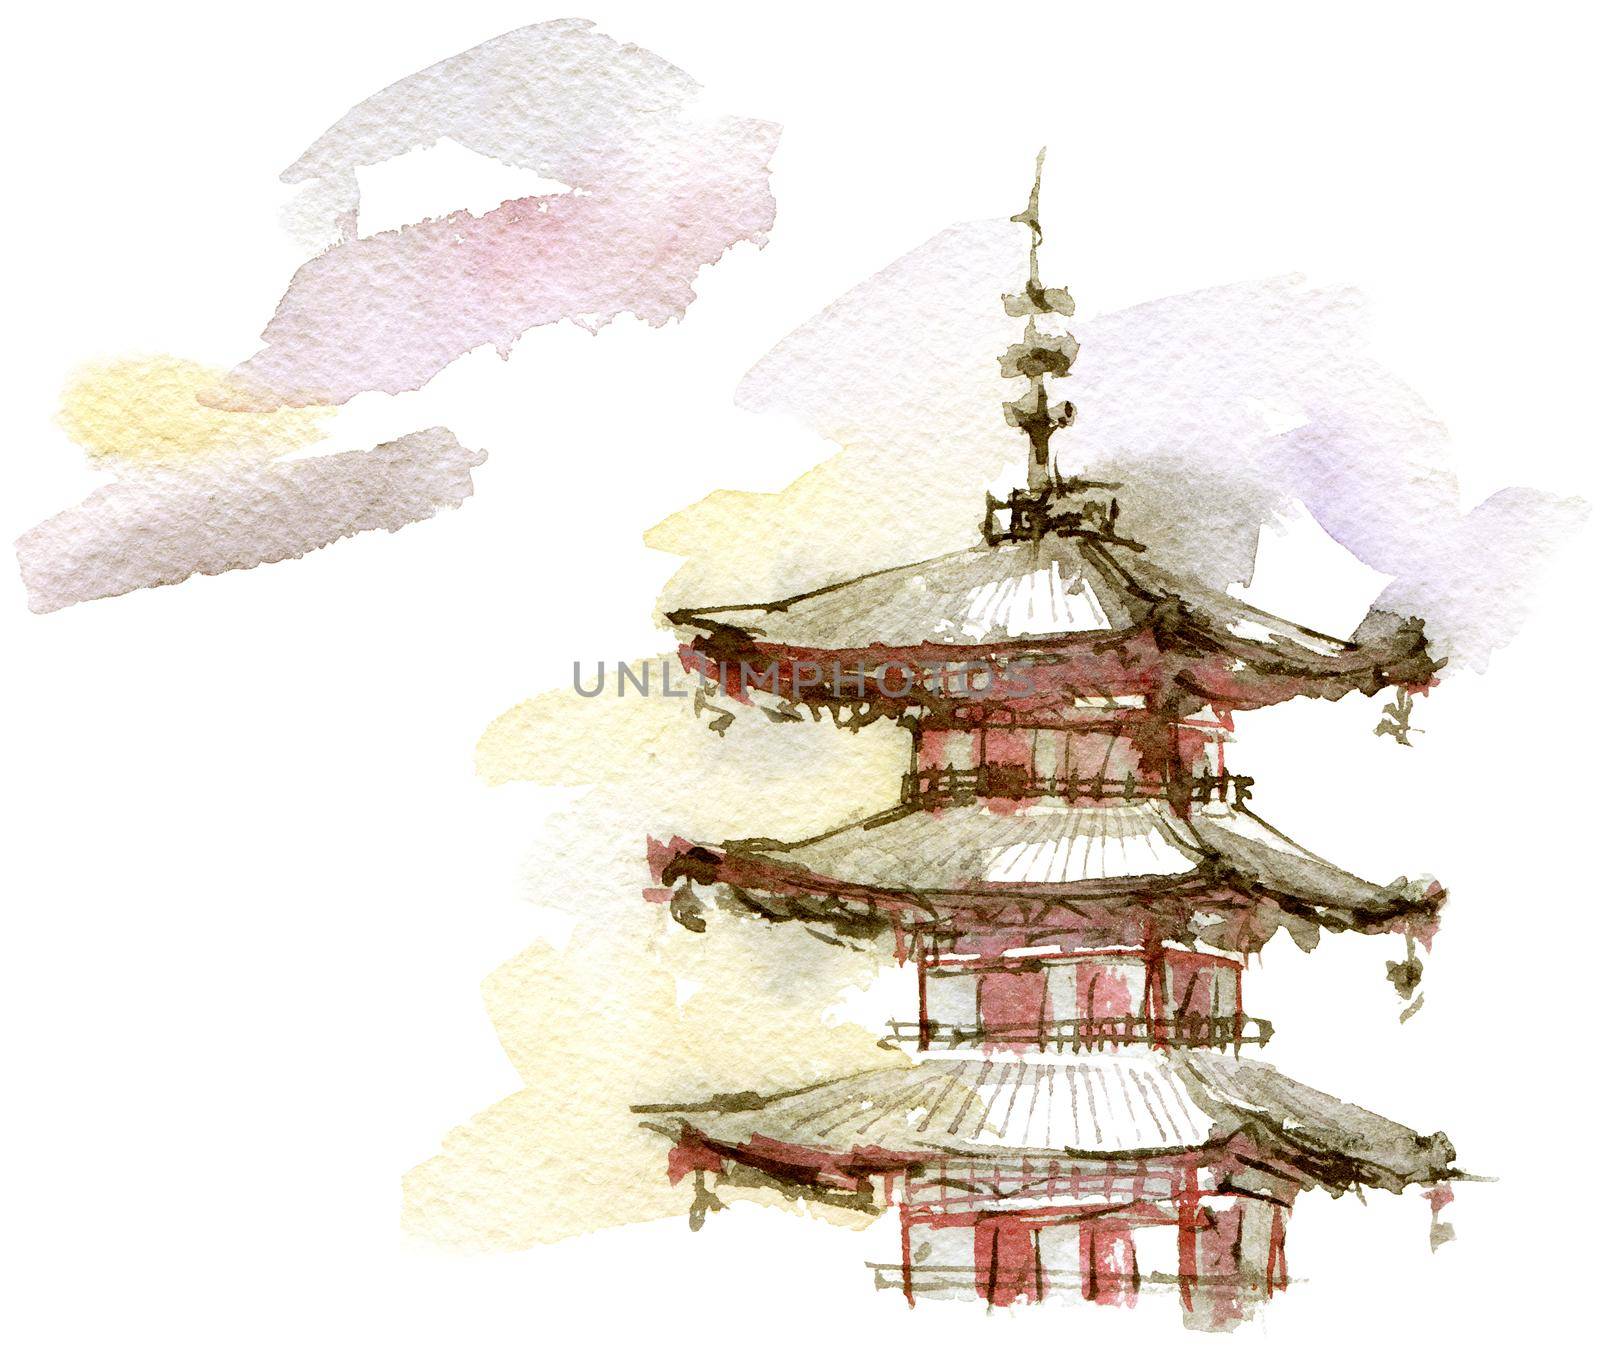 Traditional japanese landscape with pagoda building and trees. Artistic painting by ink and watercolor in sumi-e style.